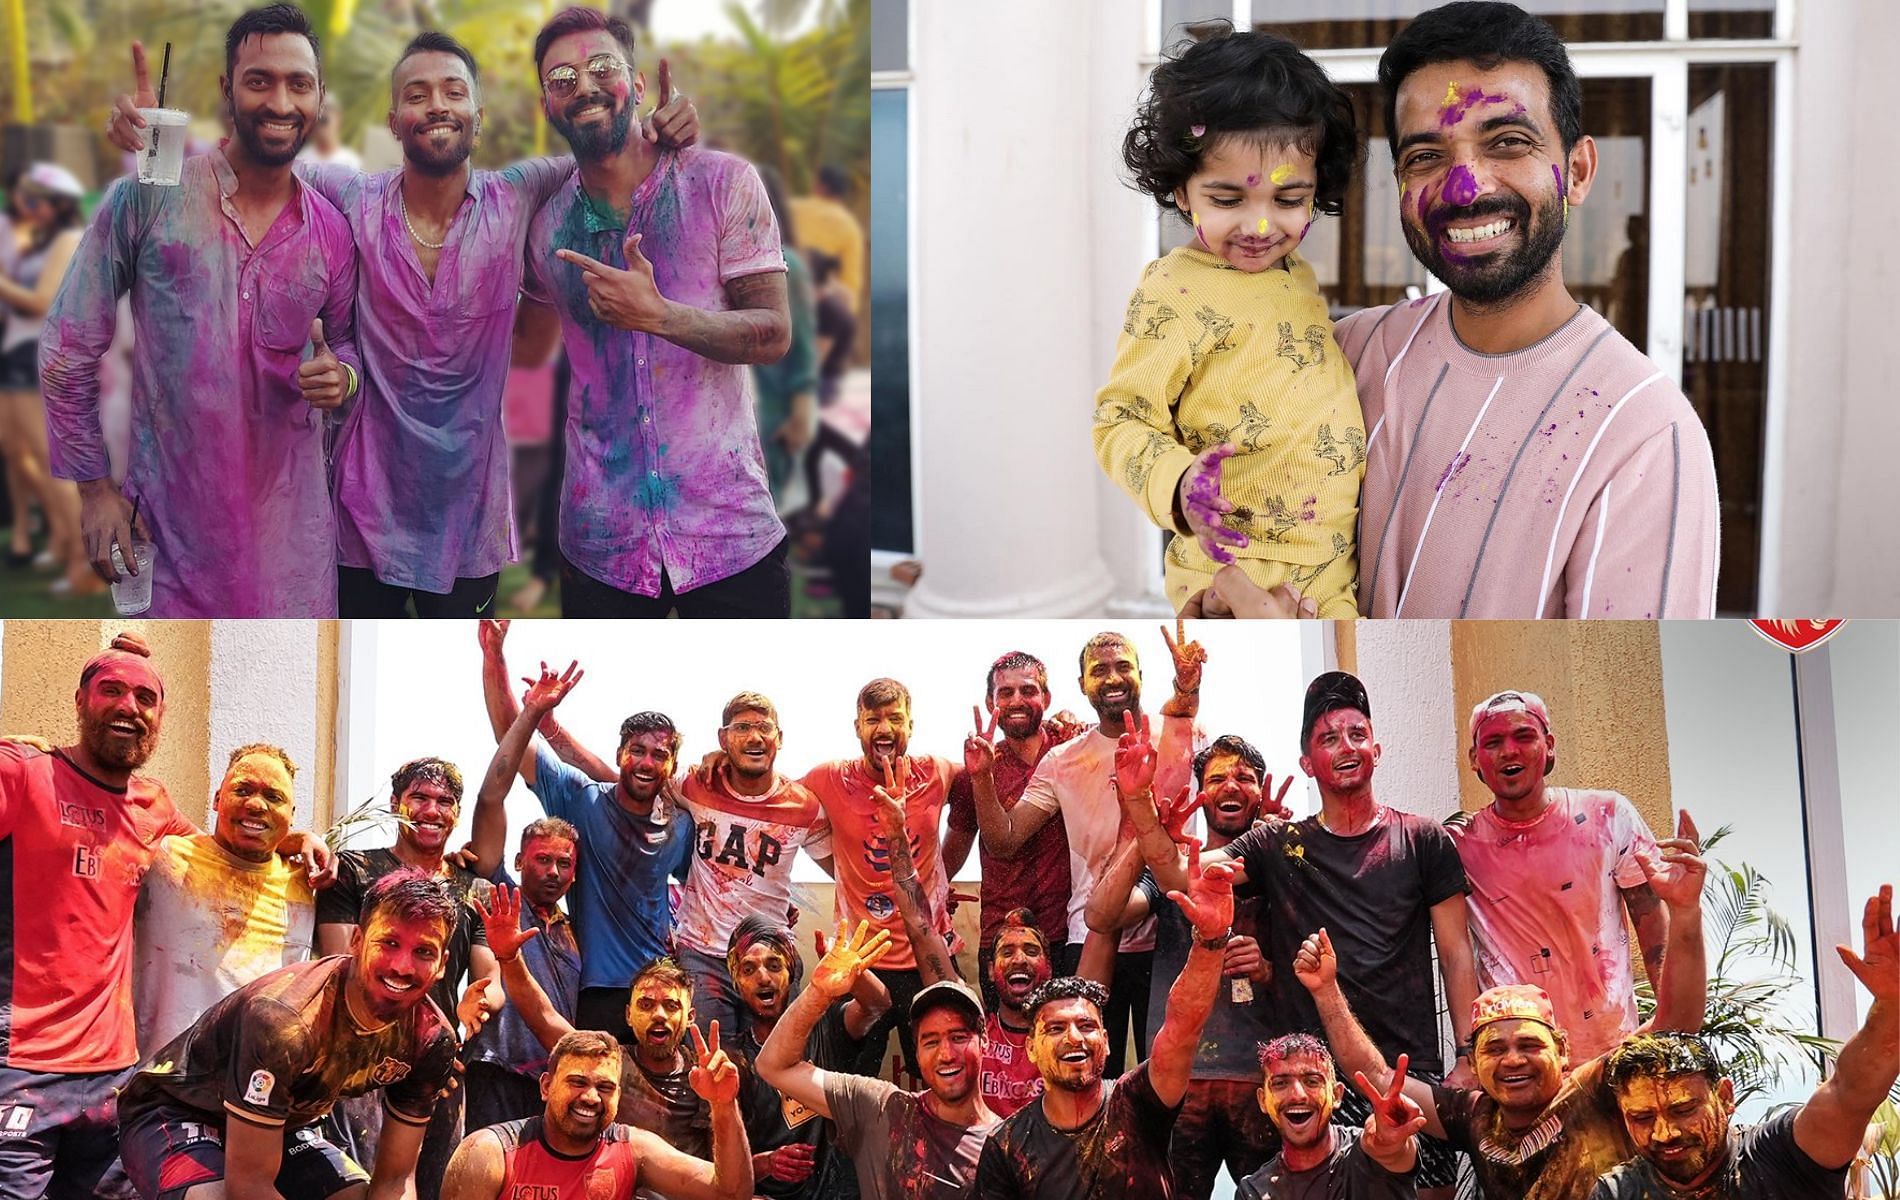 Pictures of Holi celebrations shared by IPL franchises on Twitter